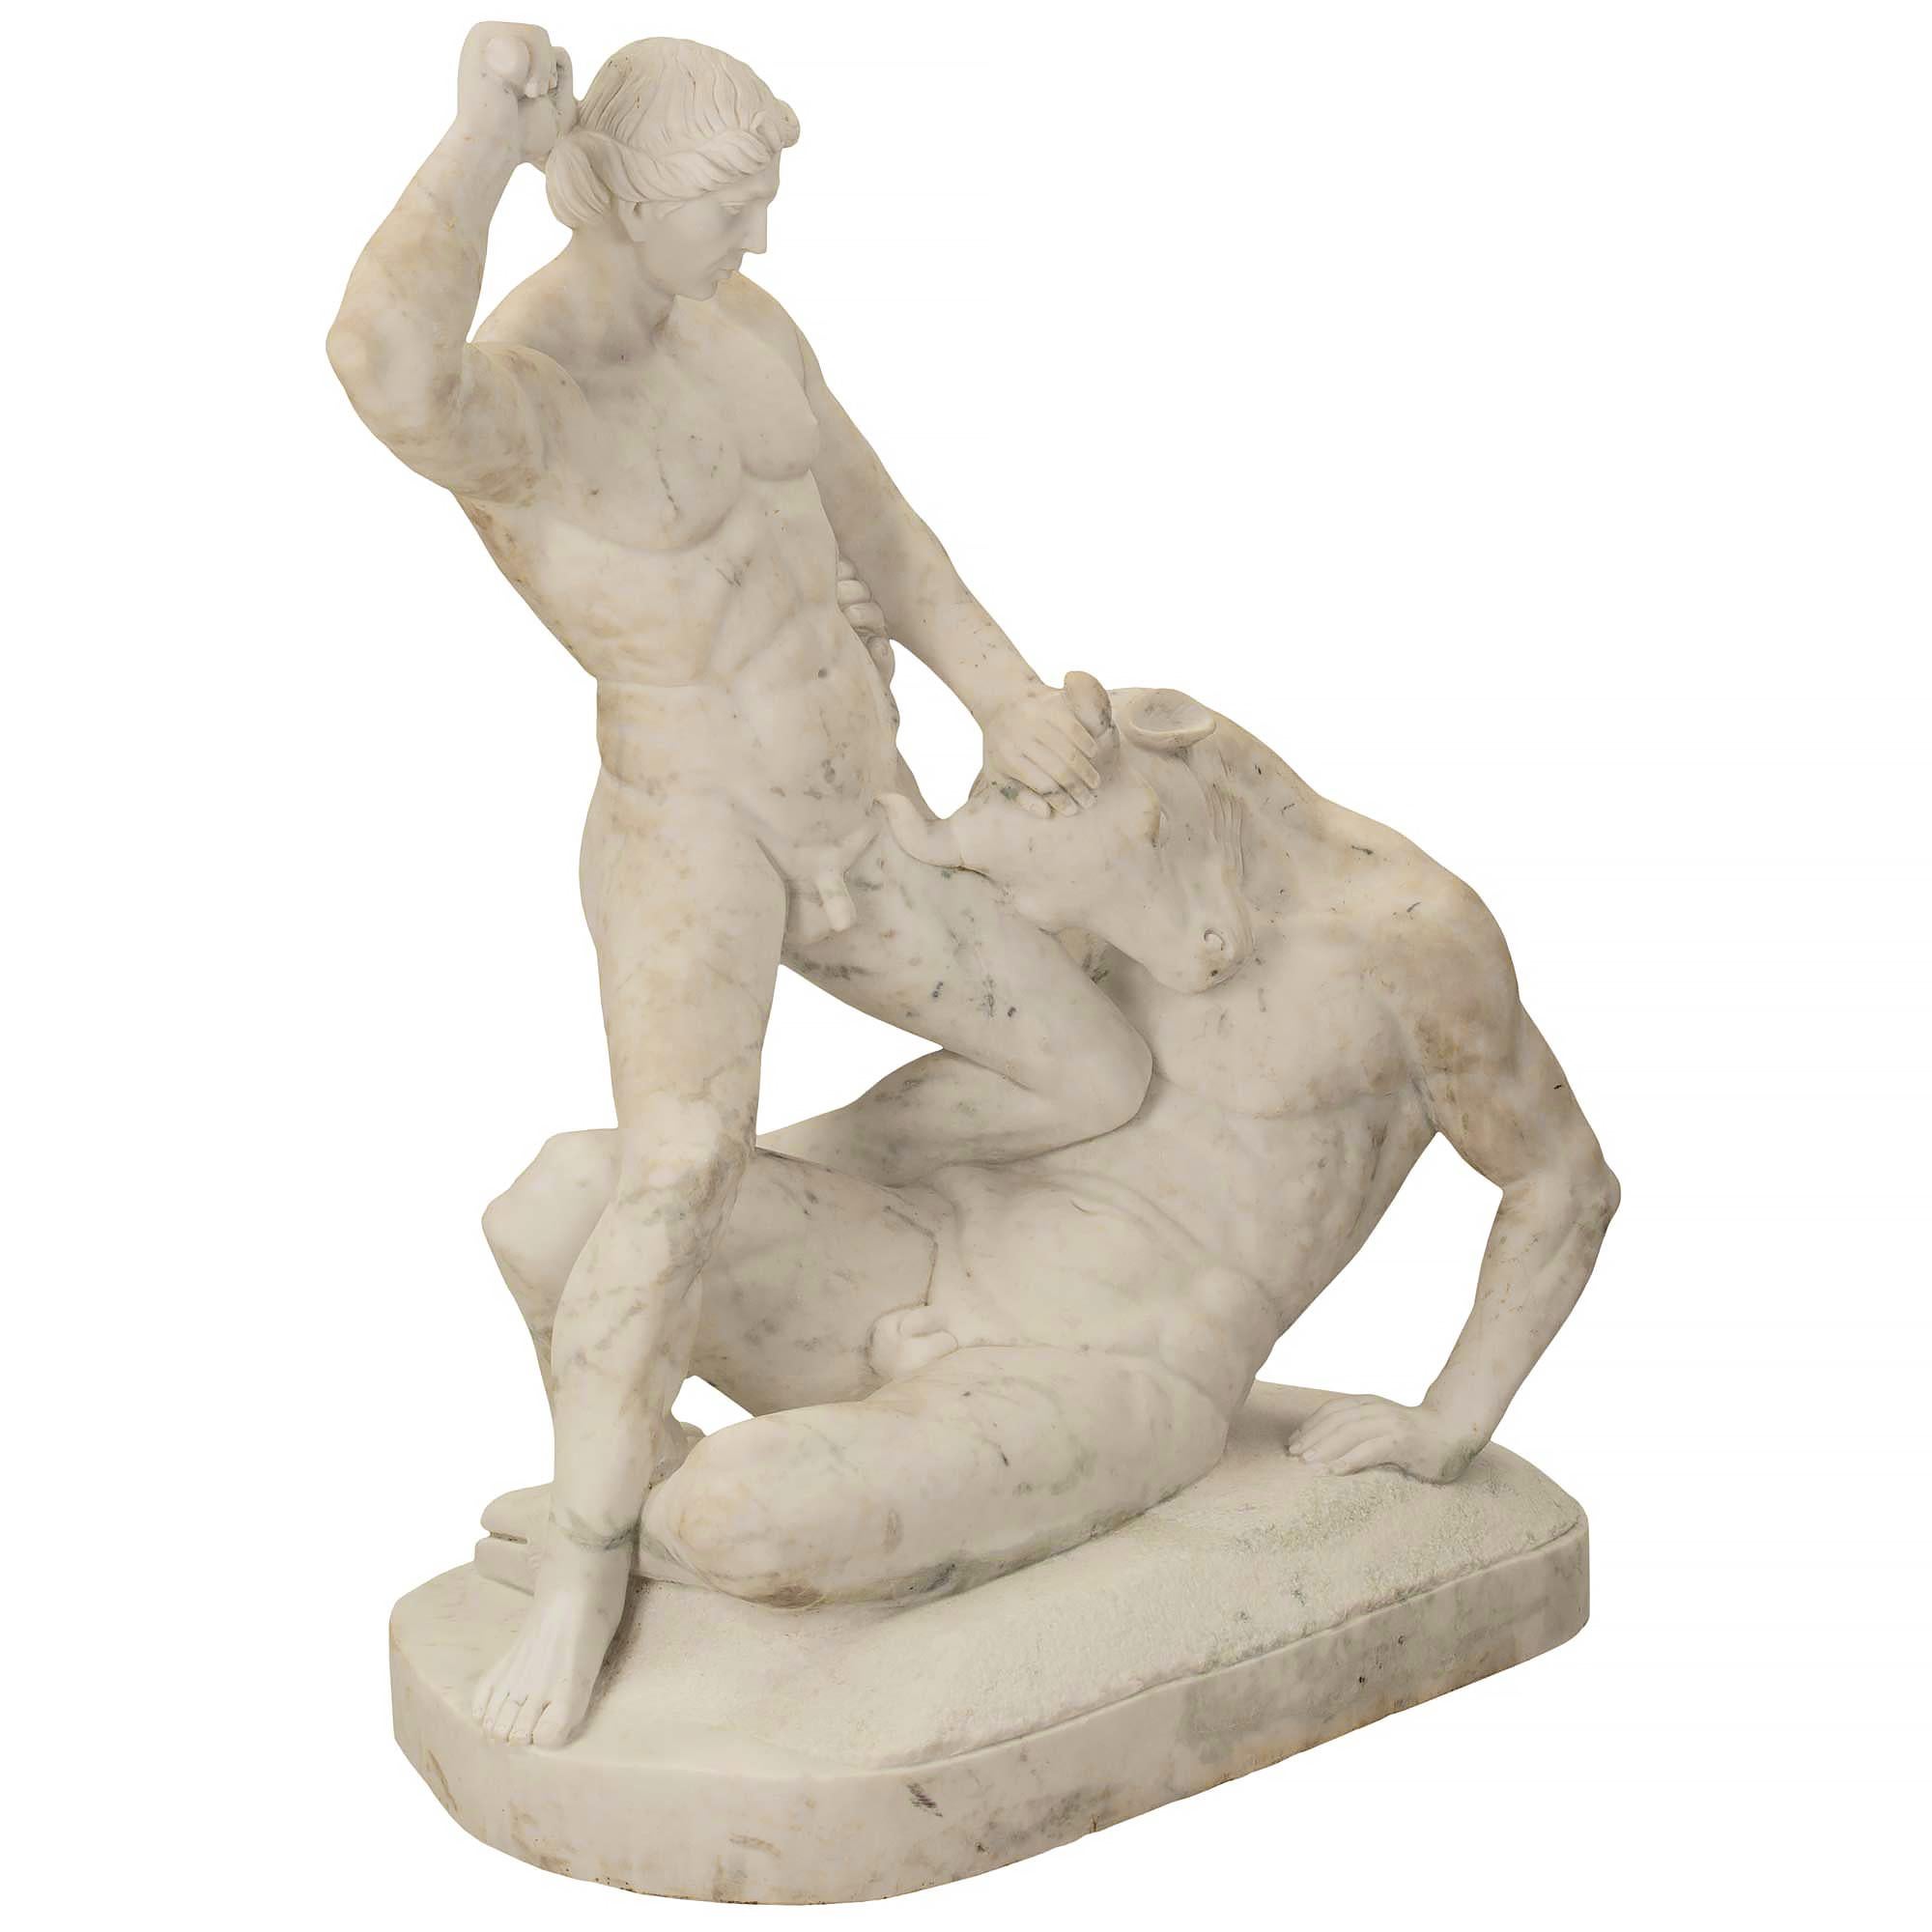 A very handsome Italian 19th century white Carrara marble statue of Theseus and the Minotaur. The statue is raised on an oval base with the Minotaur lying in defeat as Theseus is poised to strike the monster. The story of Theseus and the Minotaur